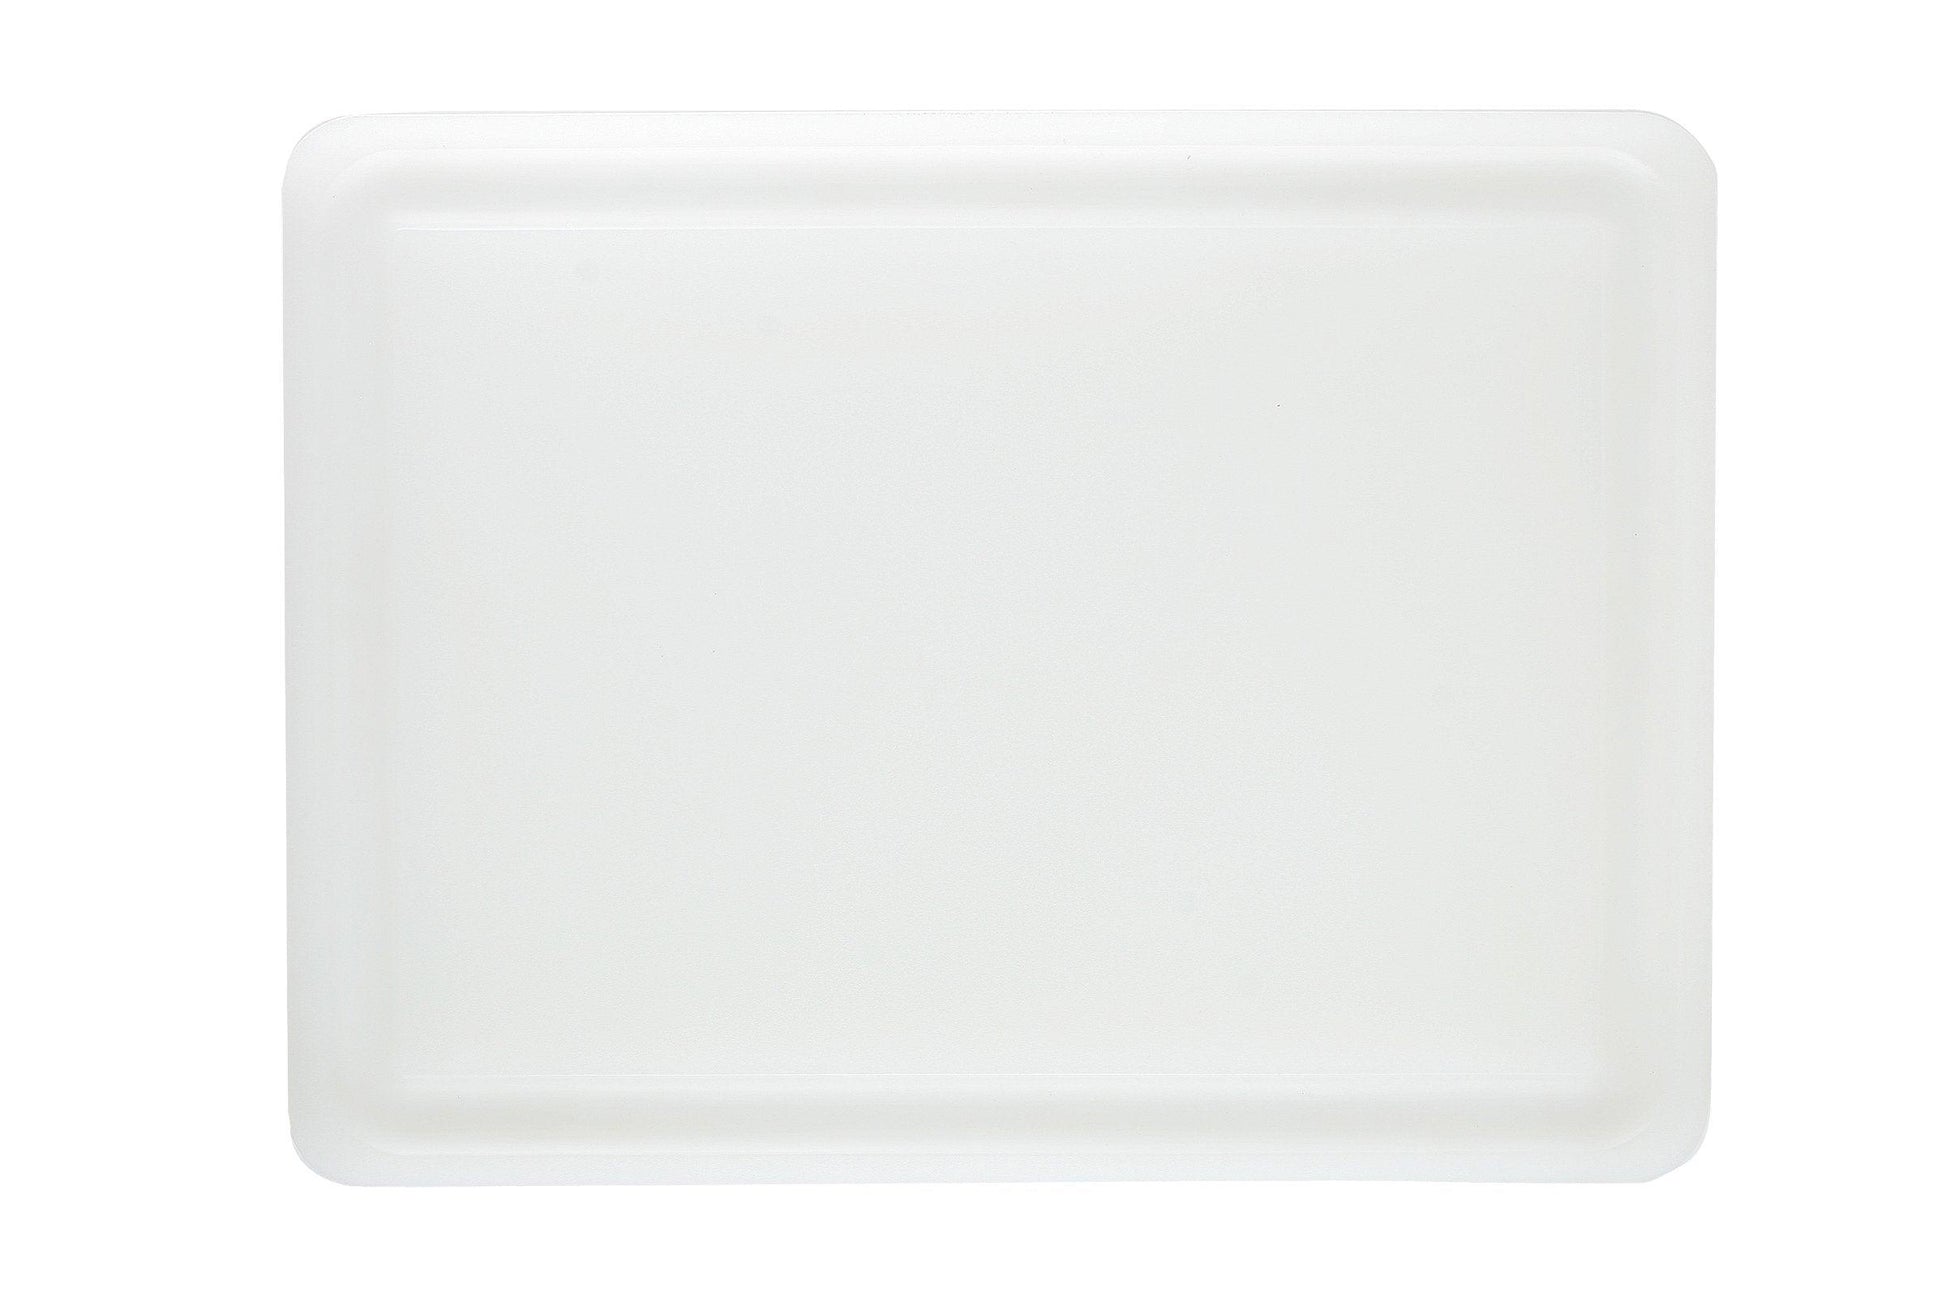 Dexas NSF Polysafe Pastry/Cutting Board with Well, 15 by 20 inches, White - CookCave